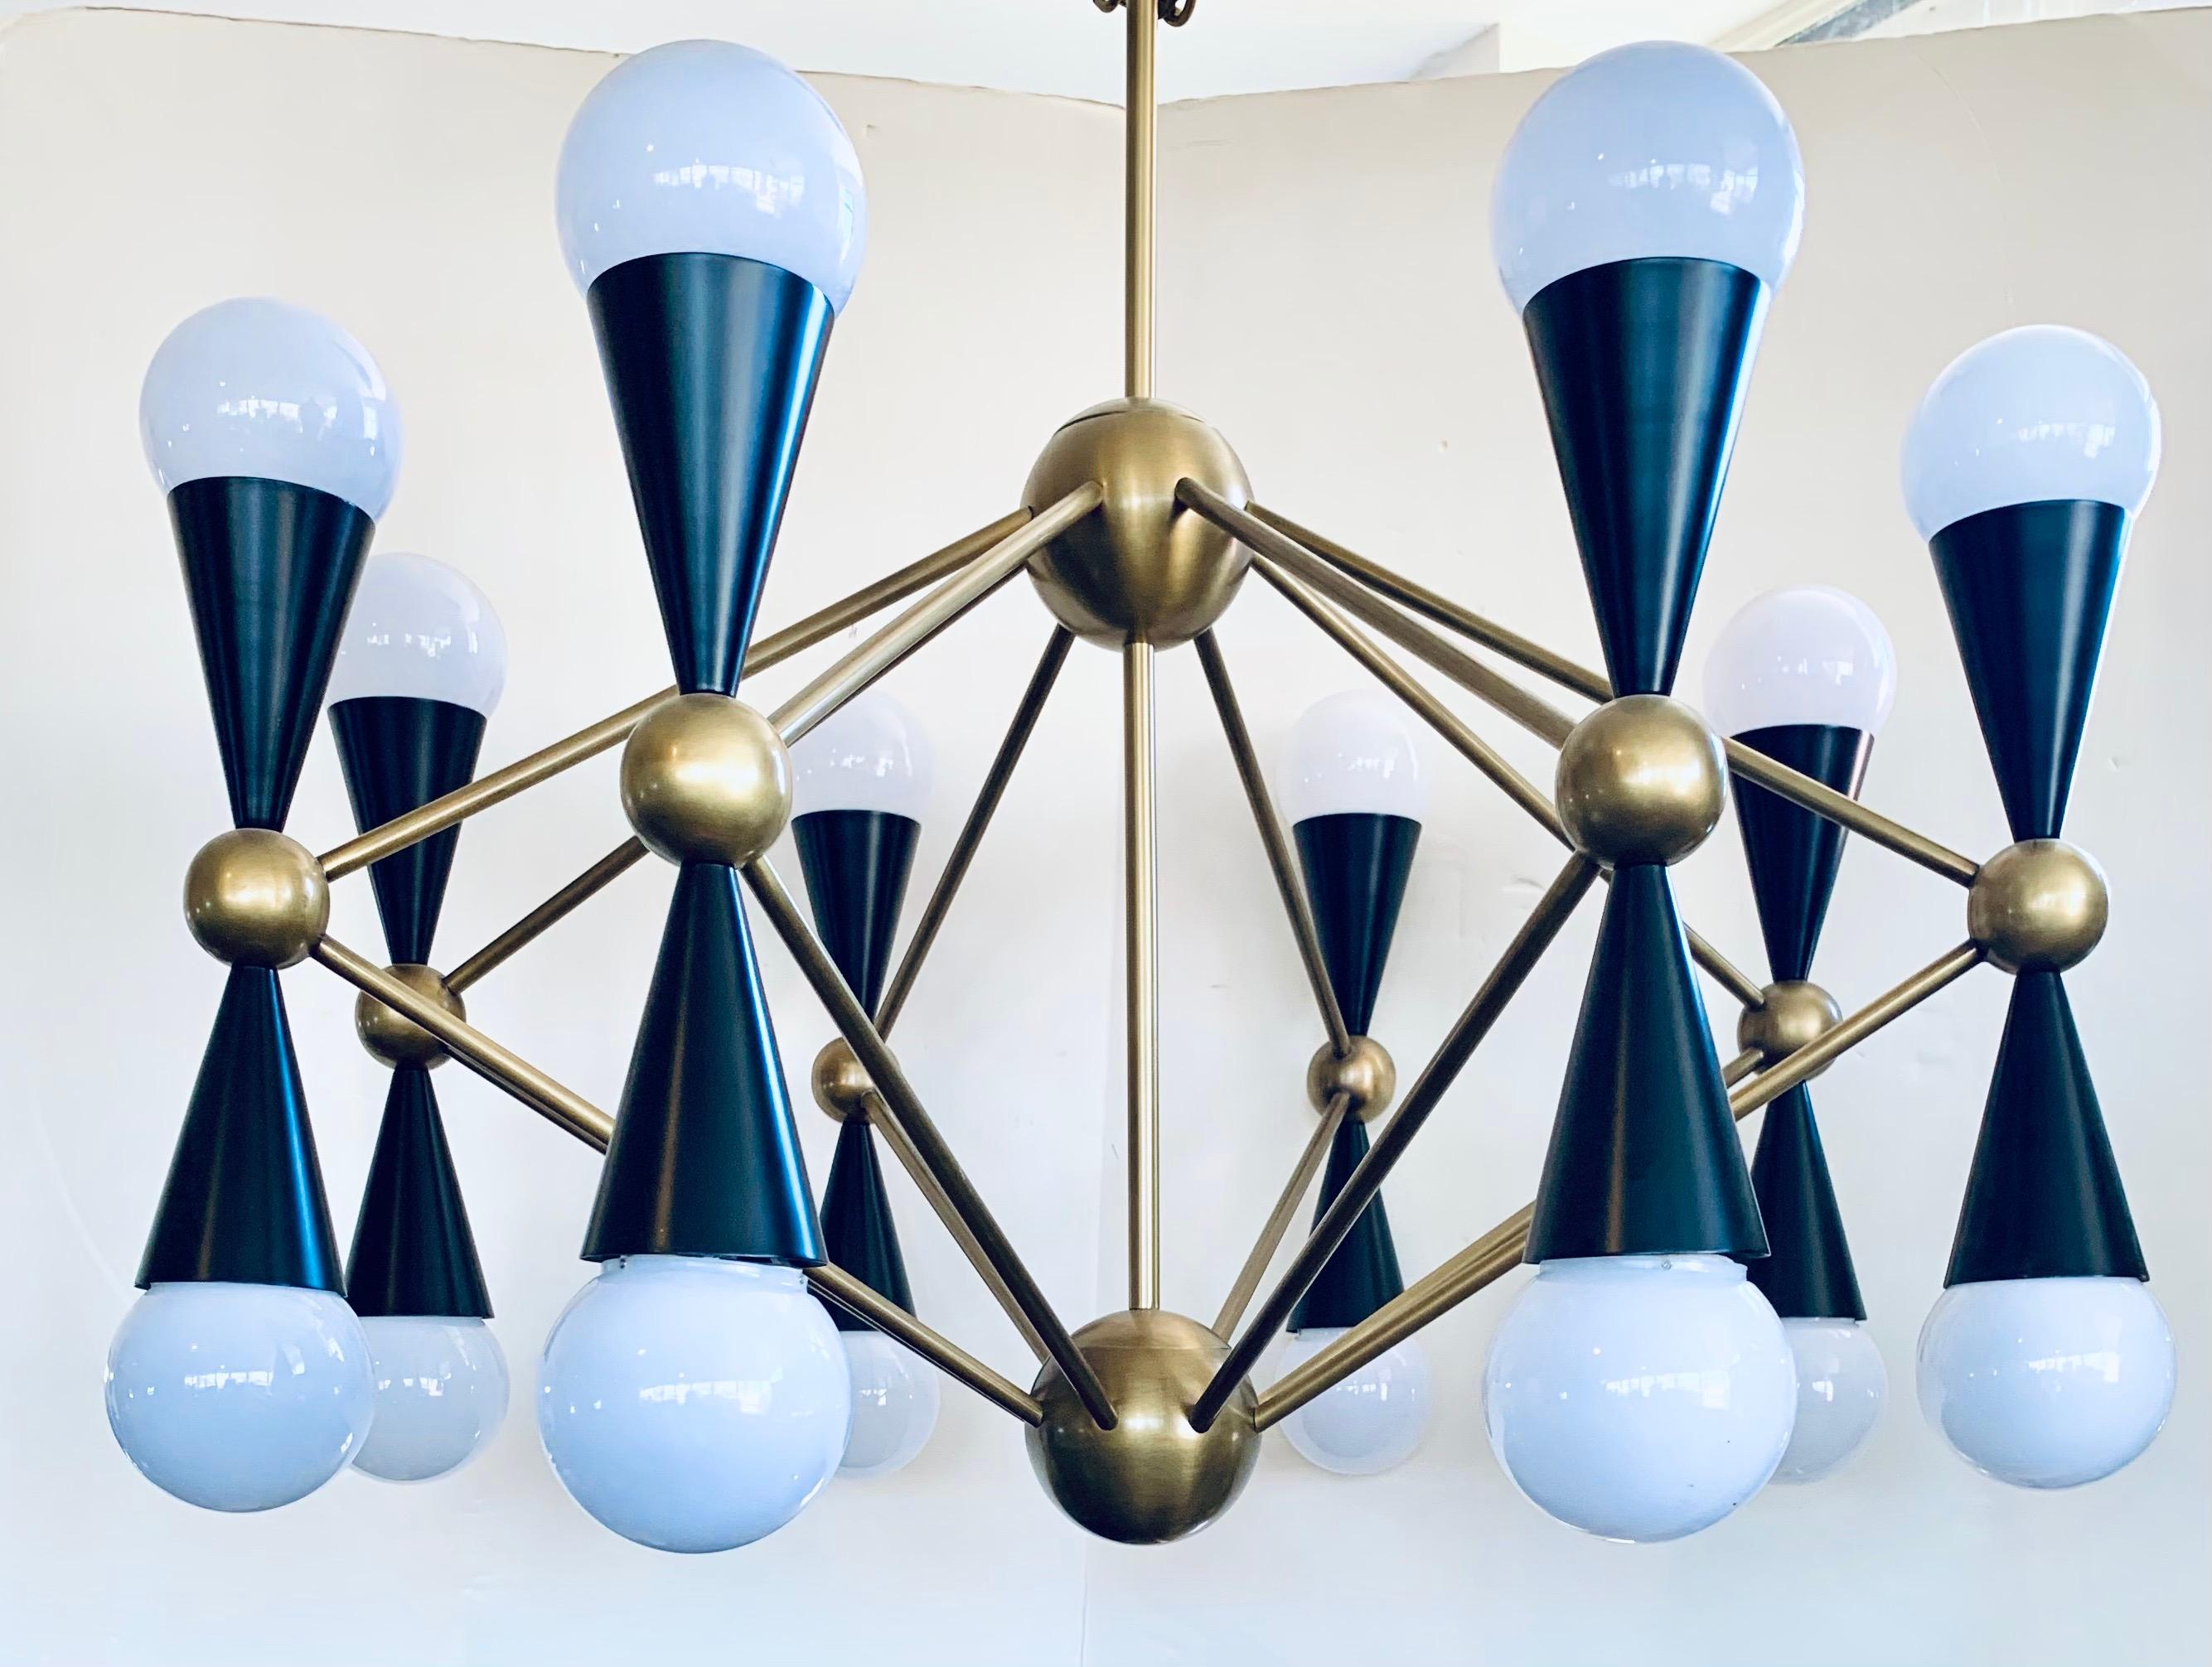 Eclectic mix of aesthetics can lead to some drop dead gorgeous lighting. Simple geometric shapes cones and spheres collide with dynamic results. Ideal scale for a dining room or a spacious foyer, the architectural Caracas sixteen-light chandelier